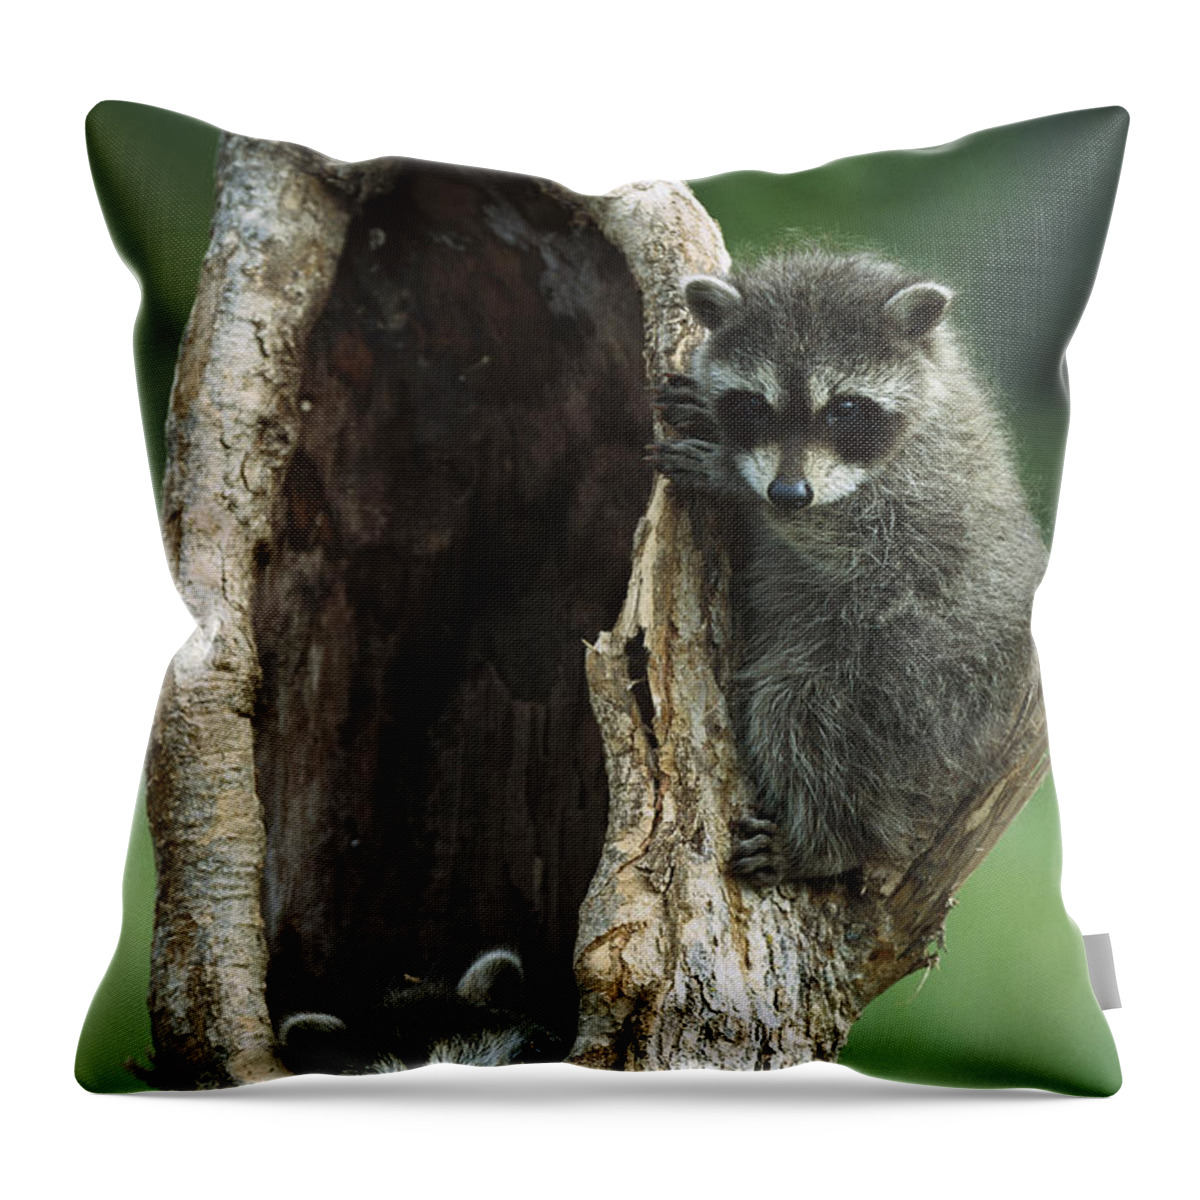 Feb0514 Throw Pillow featuring the photograph Two Raccoon Babies Playing In Tree by Konrad Wothe